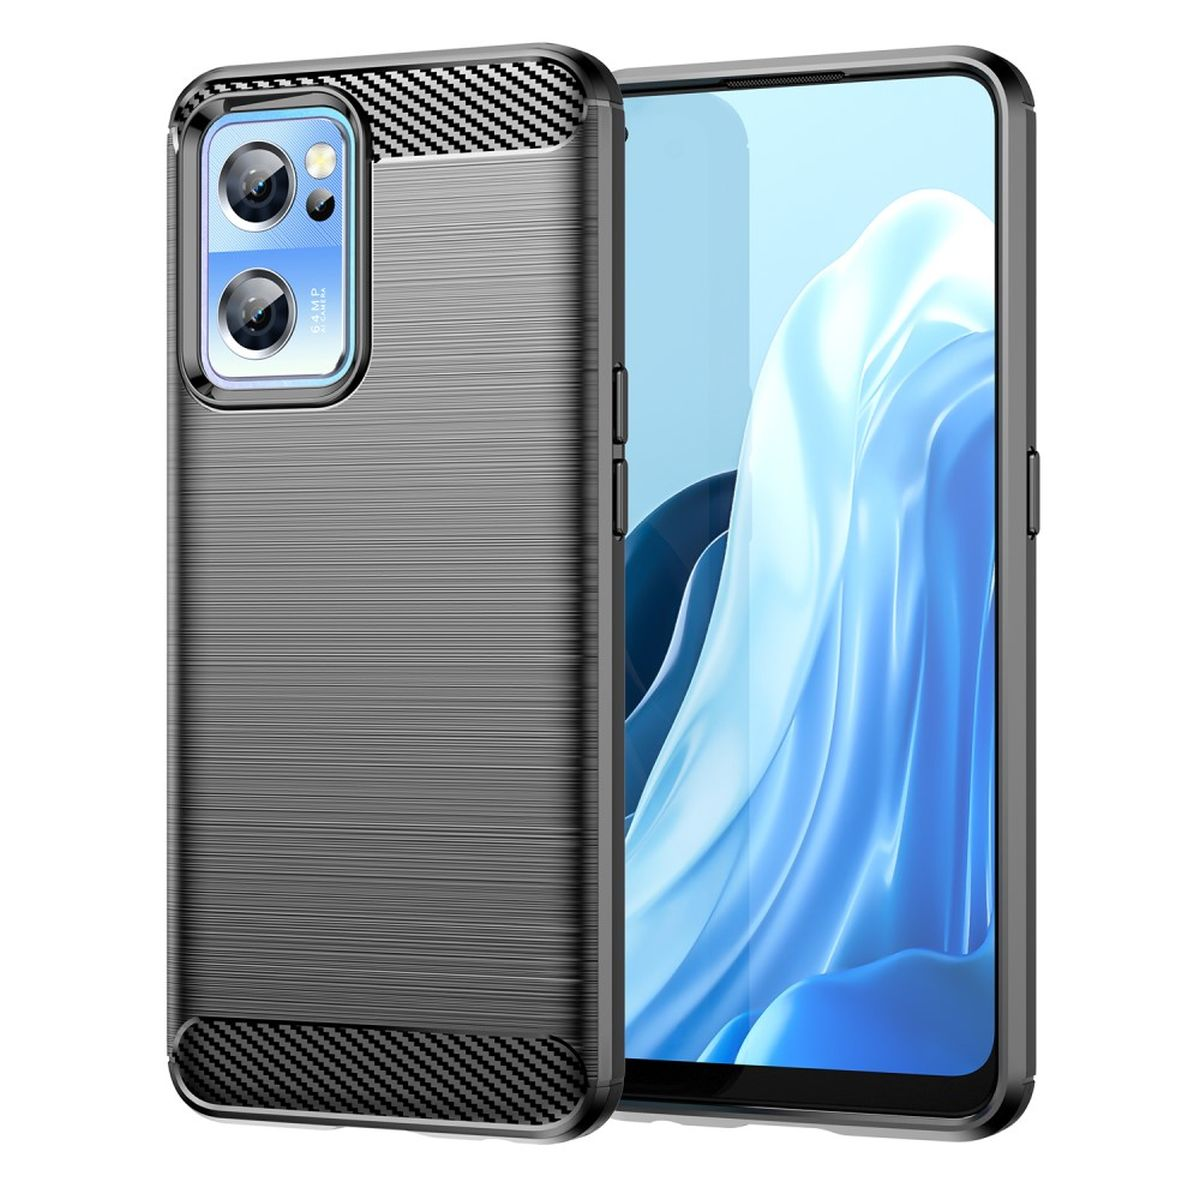 Schwarz Carbon im Nord Handycase COVERKINGZ Backcover, CE Look, 5G, 2 OnePlus,